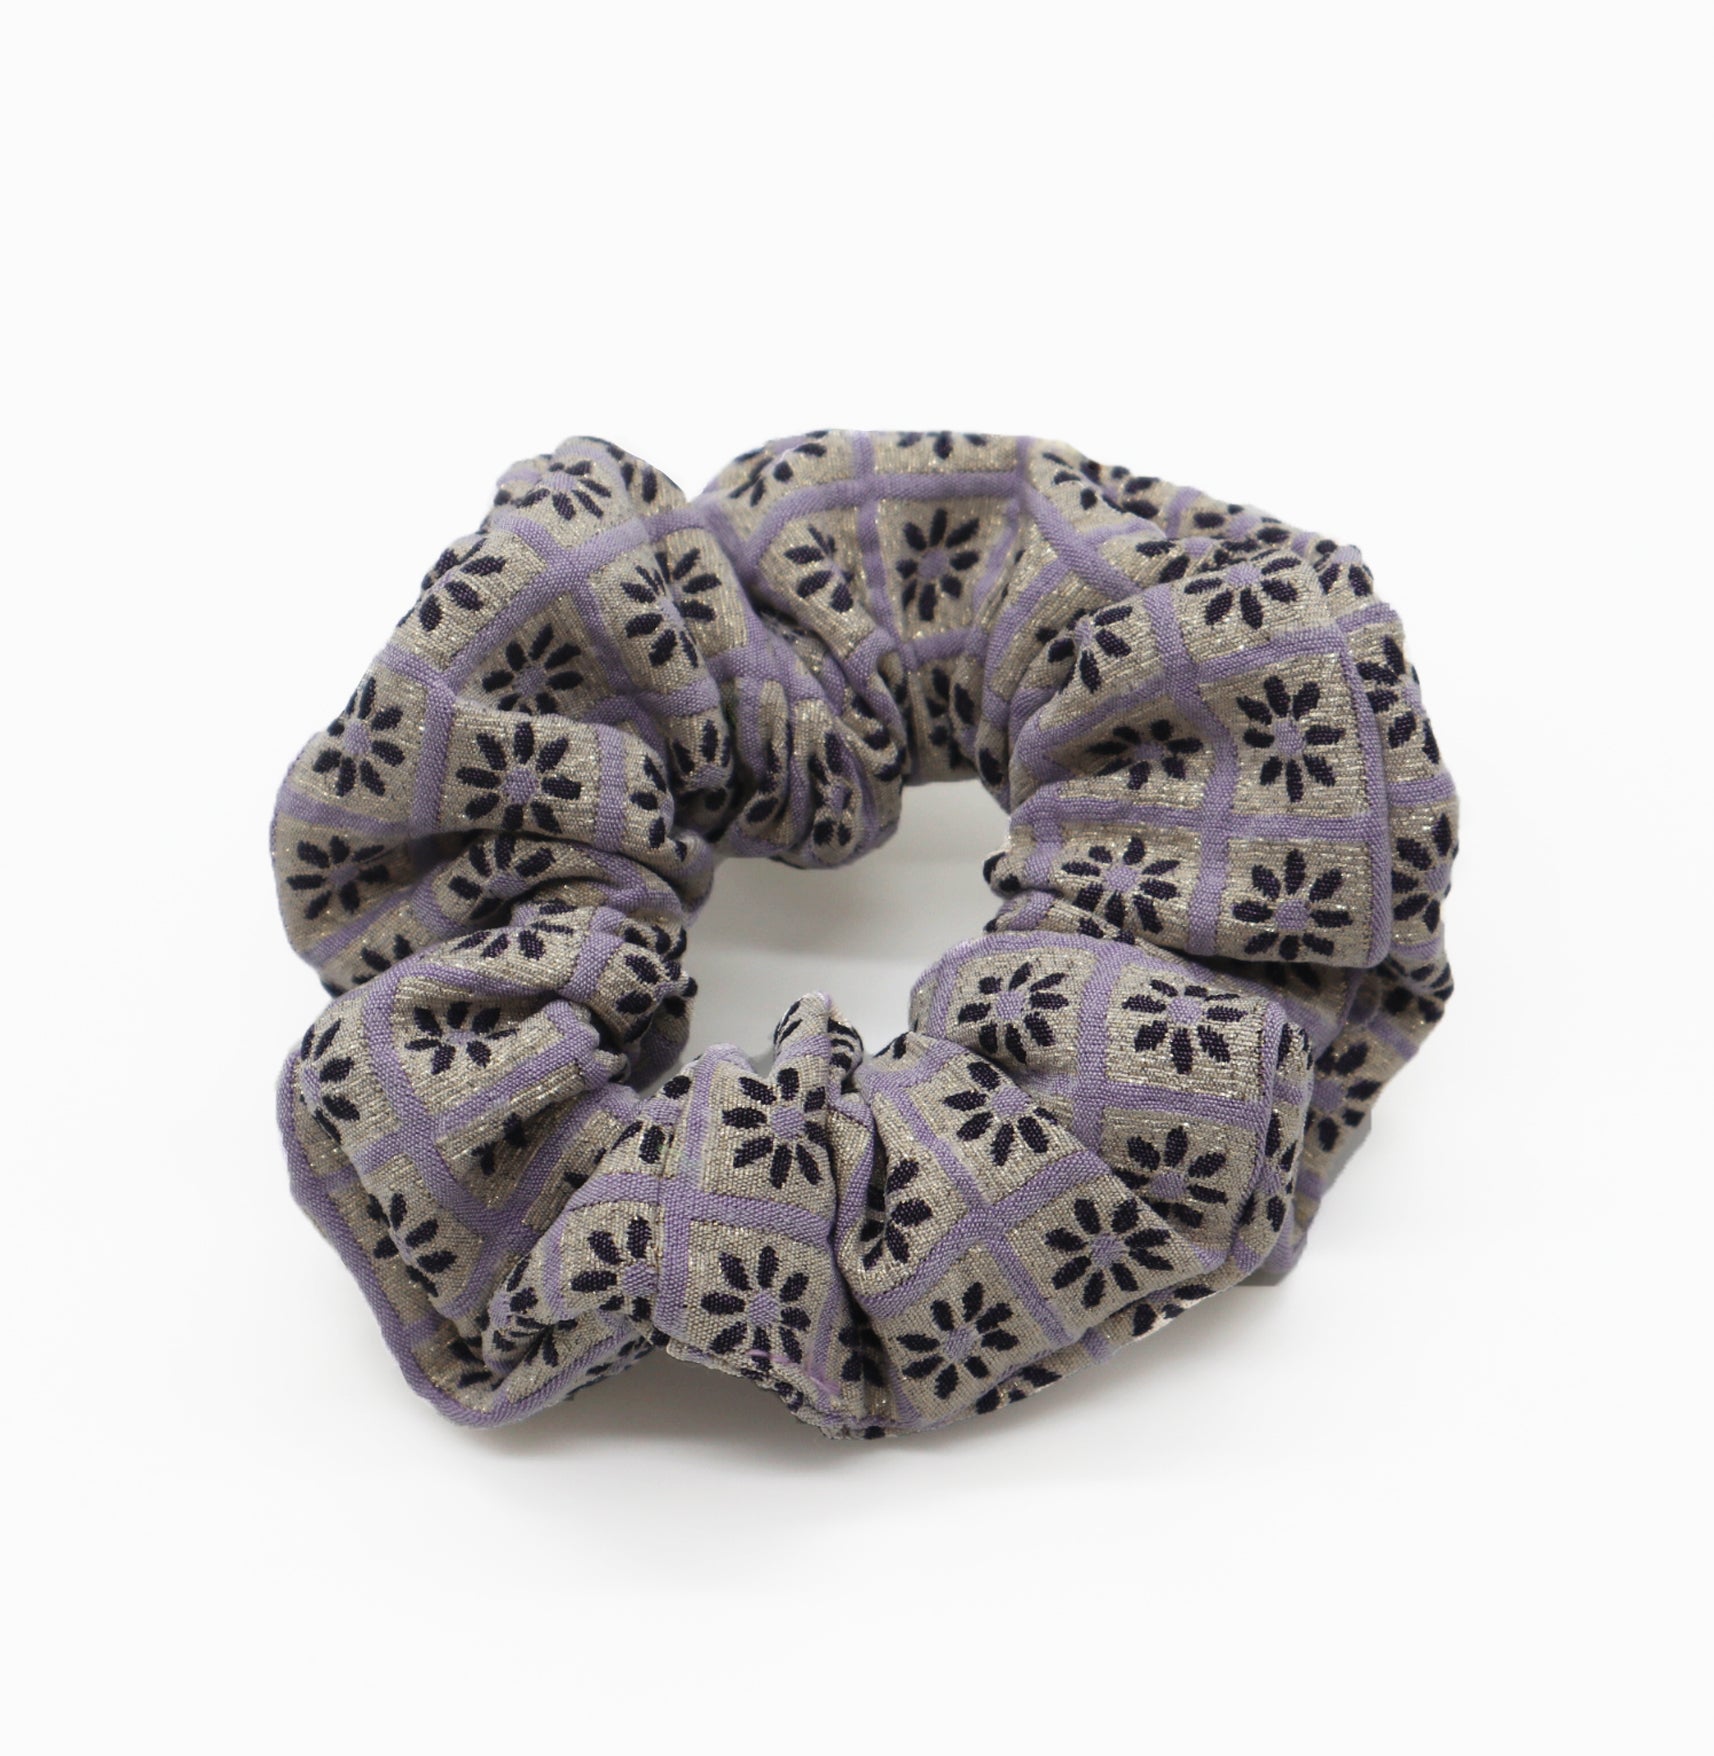 The Space Dust scrunchie